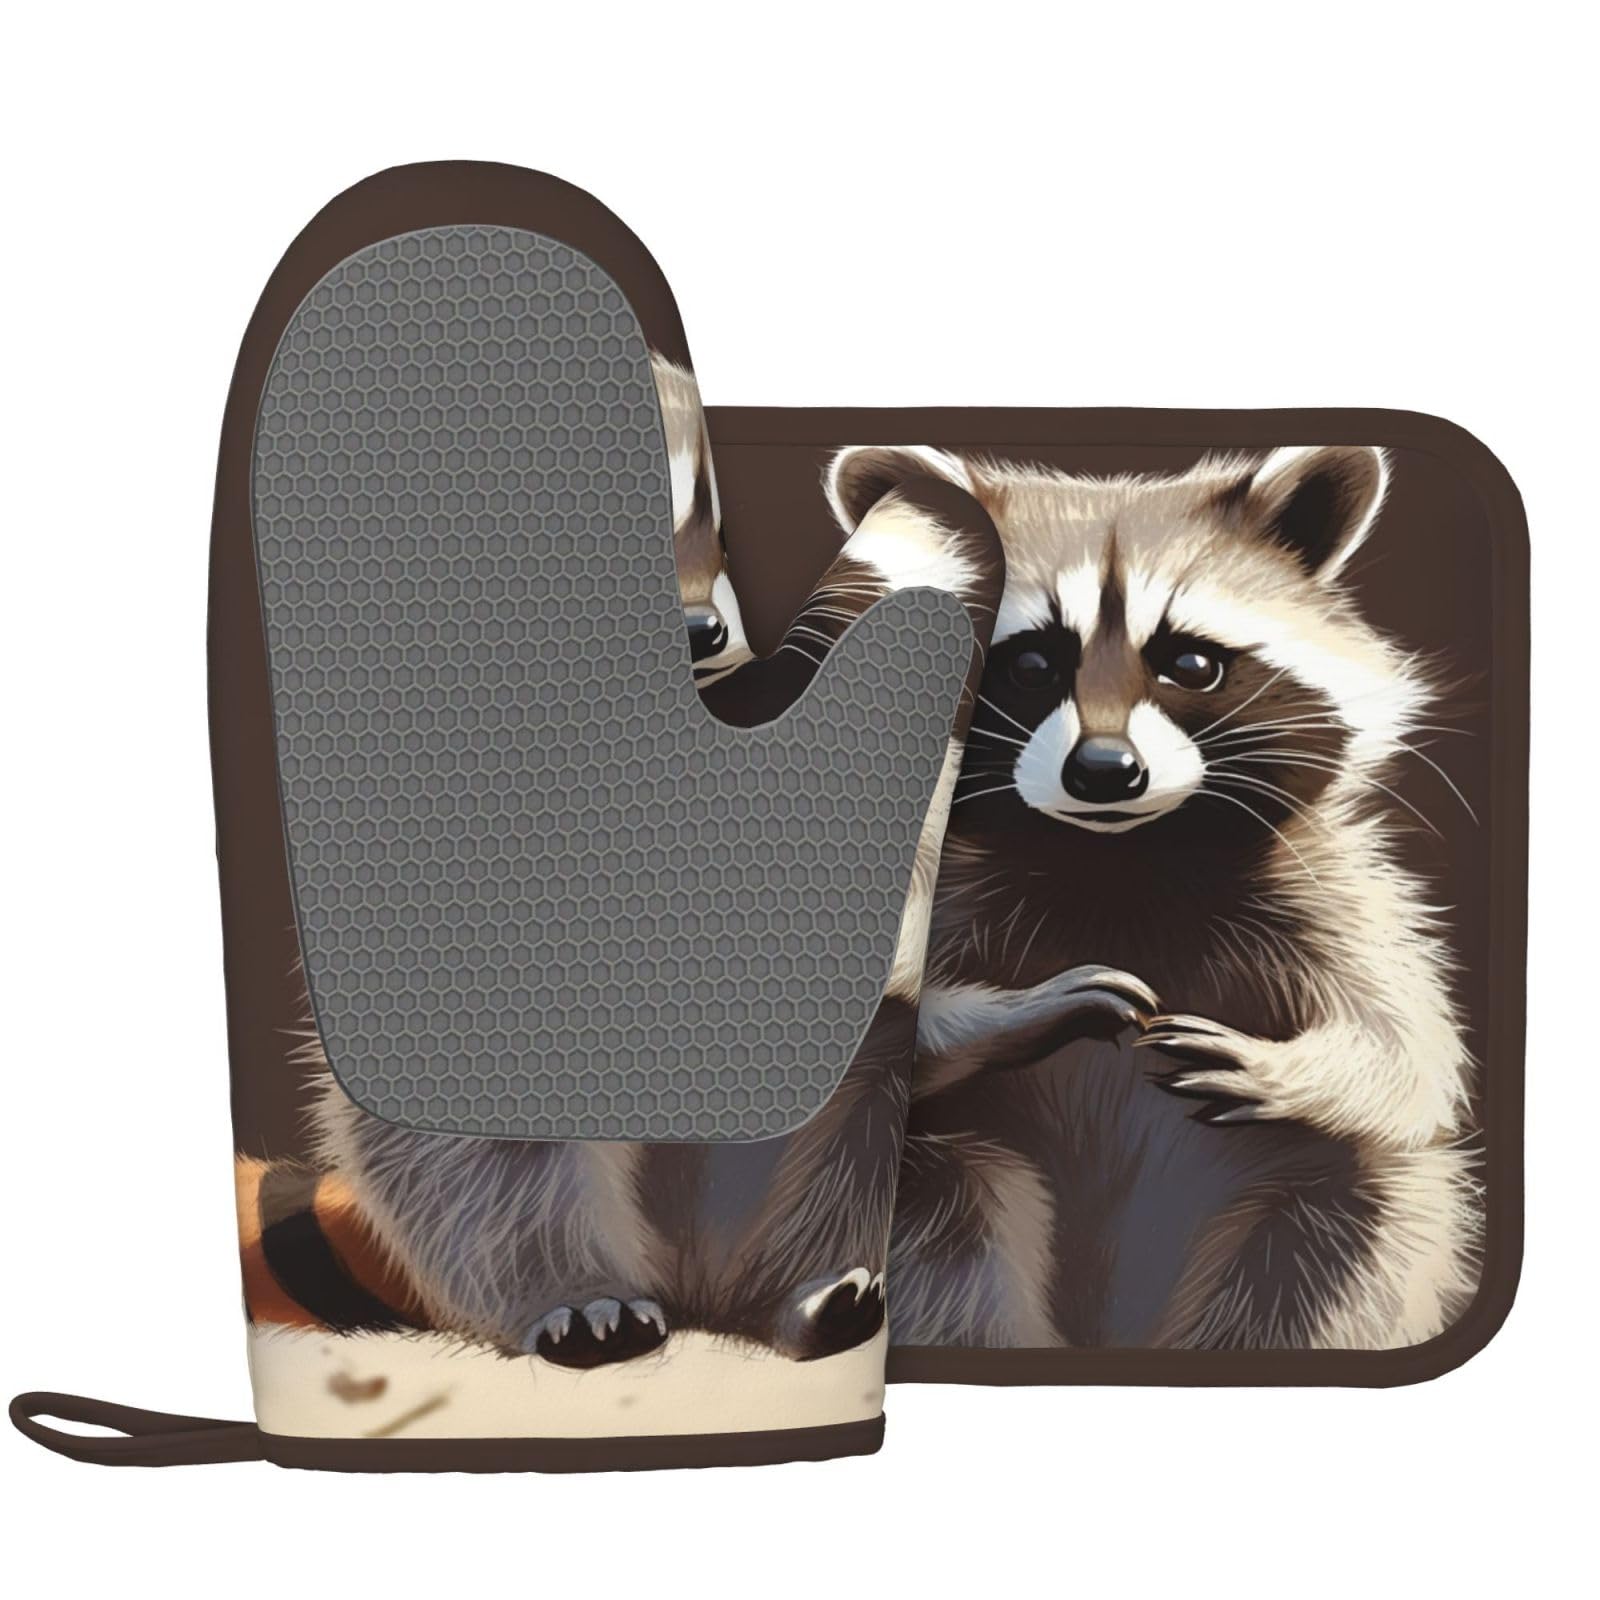 Cute Raccoon Printed Oven Mitts and Pot Holders Sets Heat Resistant Kitchen Oven Gloves Potholders Set Extra Long Non-Slip Silicone Gloves for Cooking Baking BBQ